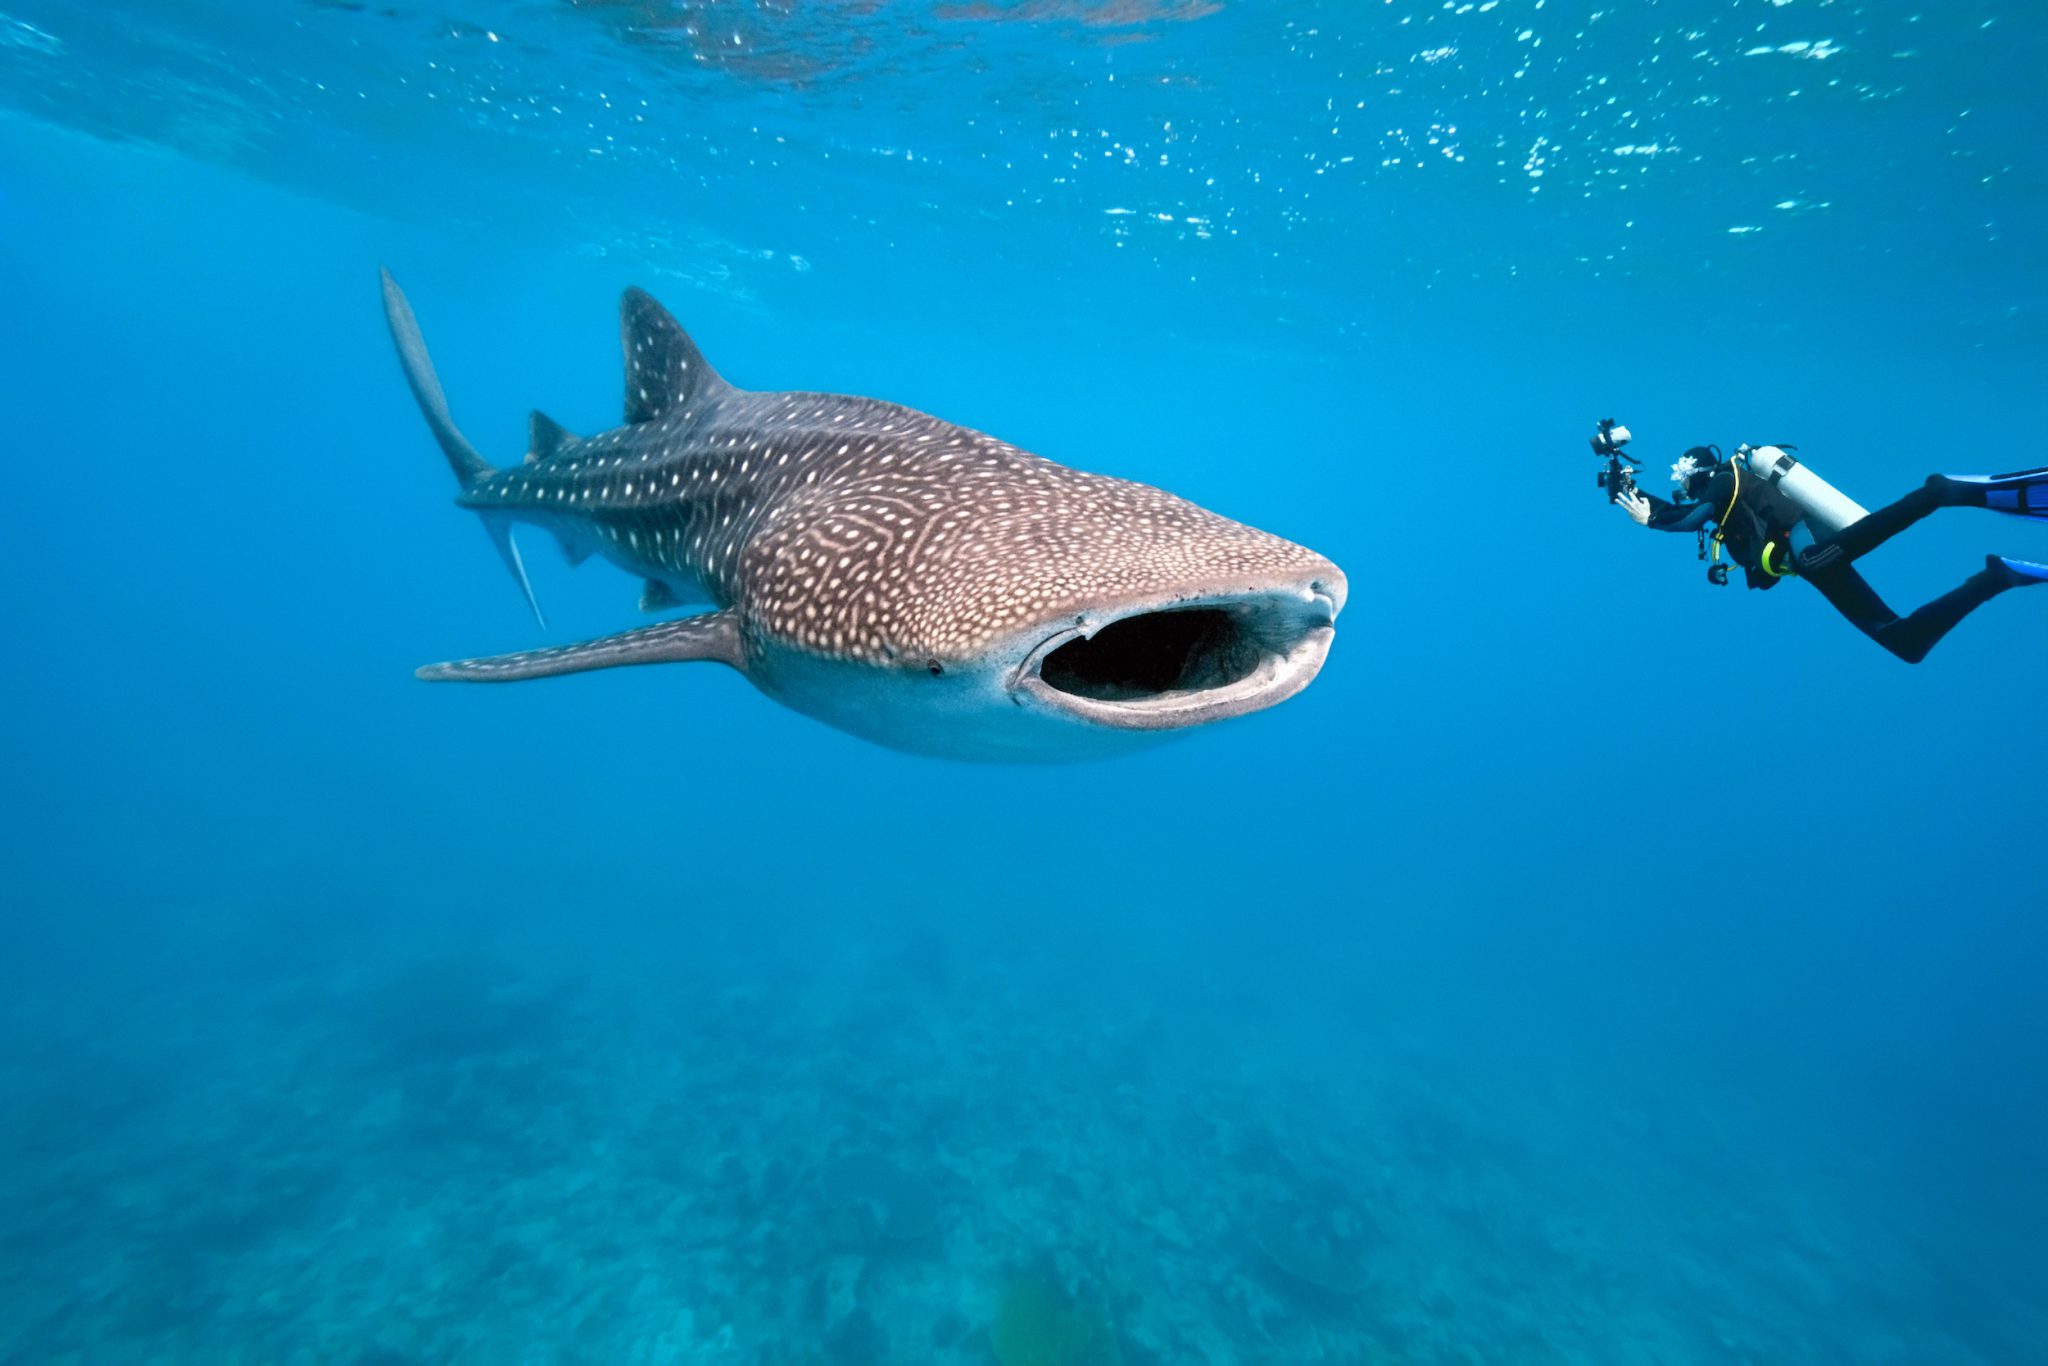 The Best Locations to Swim & Dive with Whale Sharks by Month